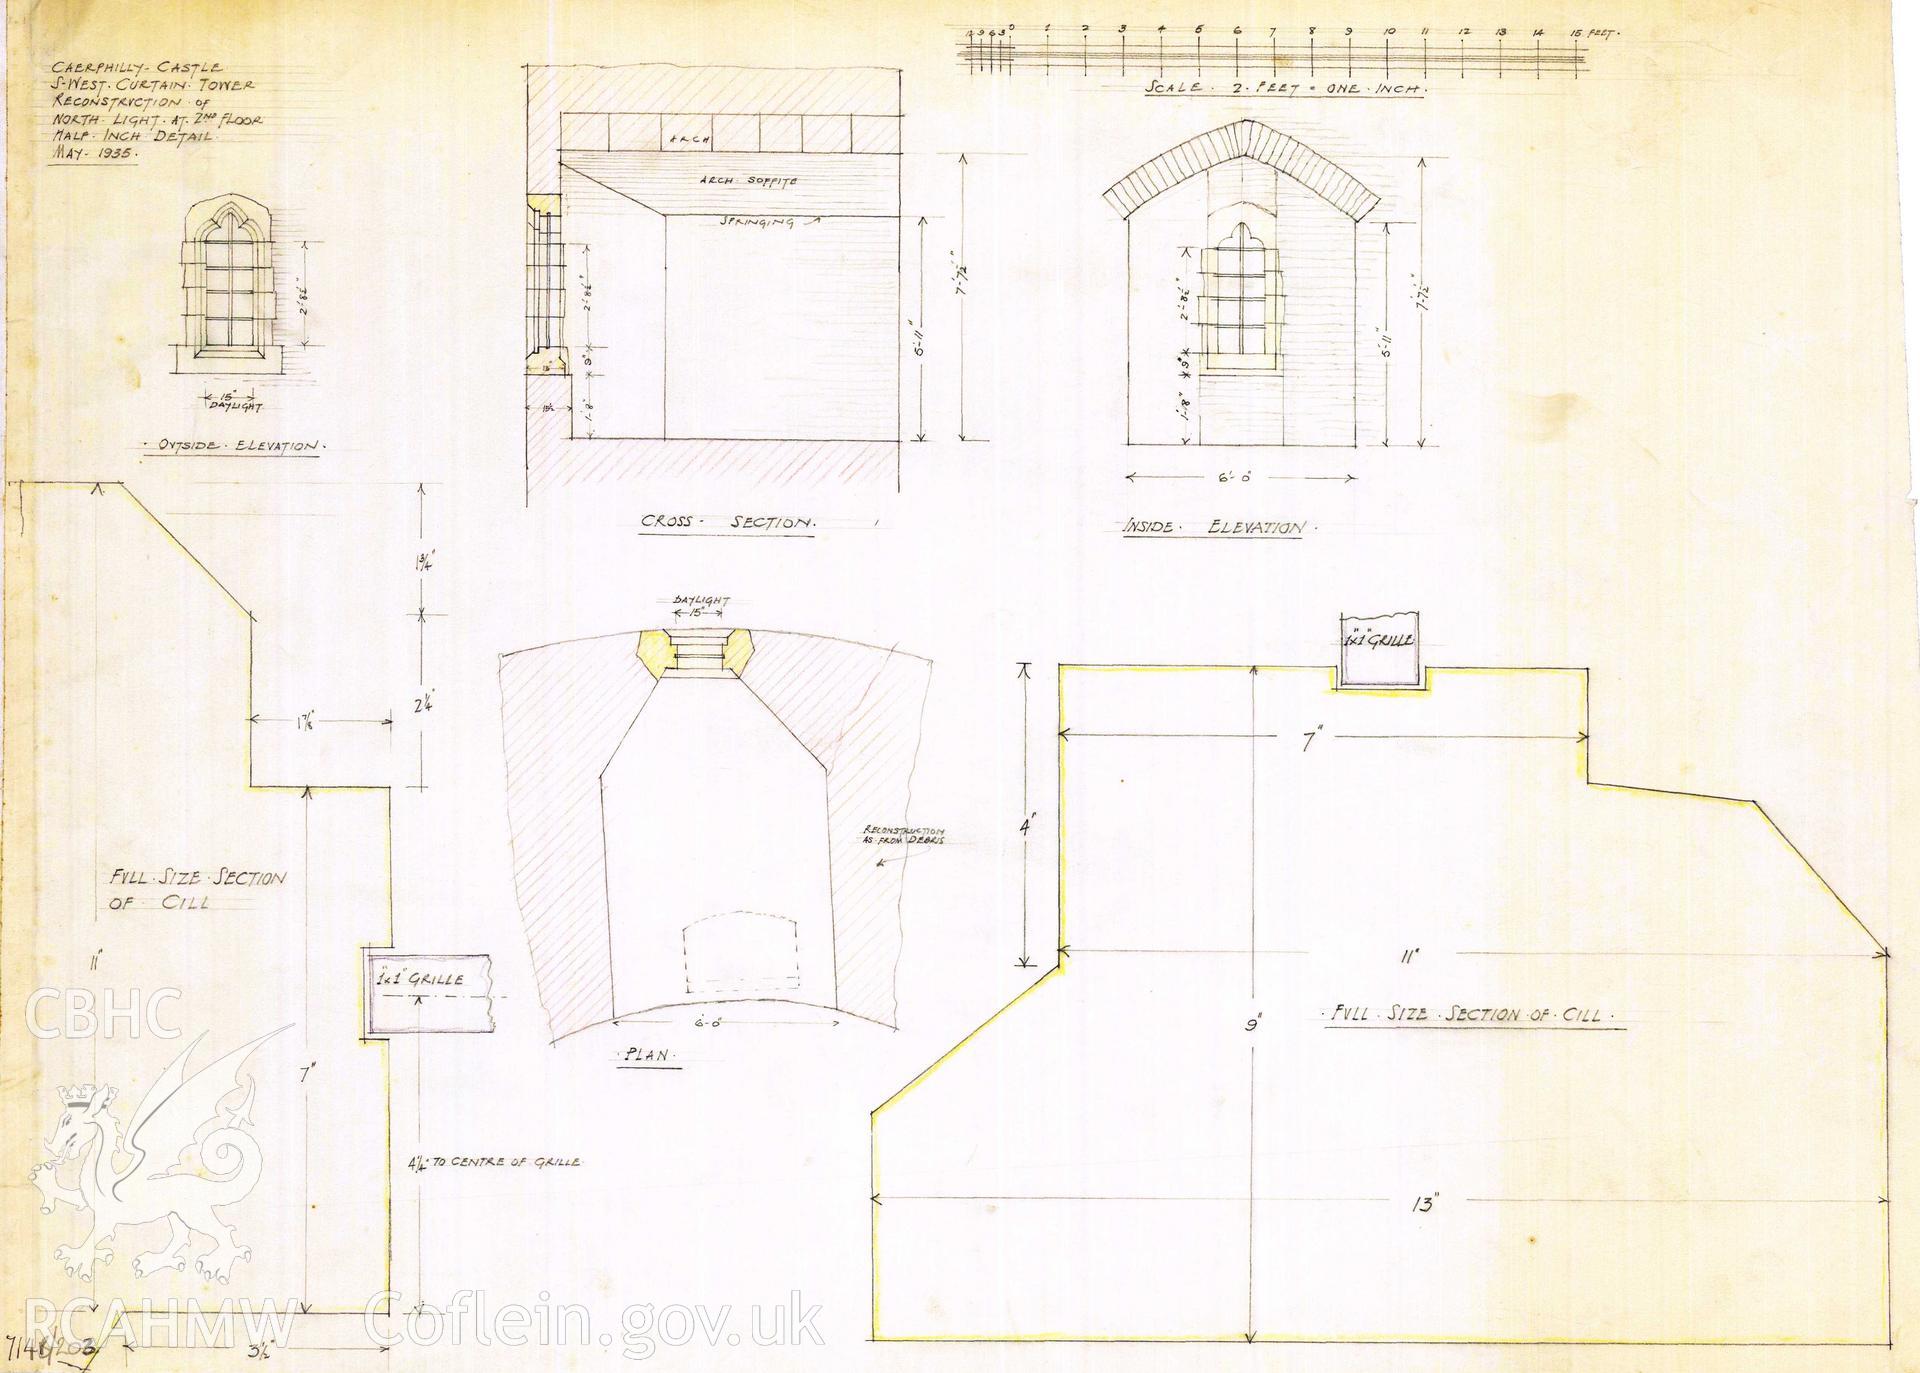 Cadw guardianship monument drawing of Caerphilly Castle. SW tower, top floor window. Cadw Ref. No:714B/203. Scale 1:24+1.